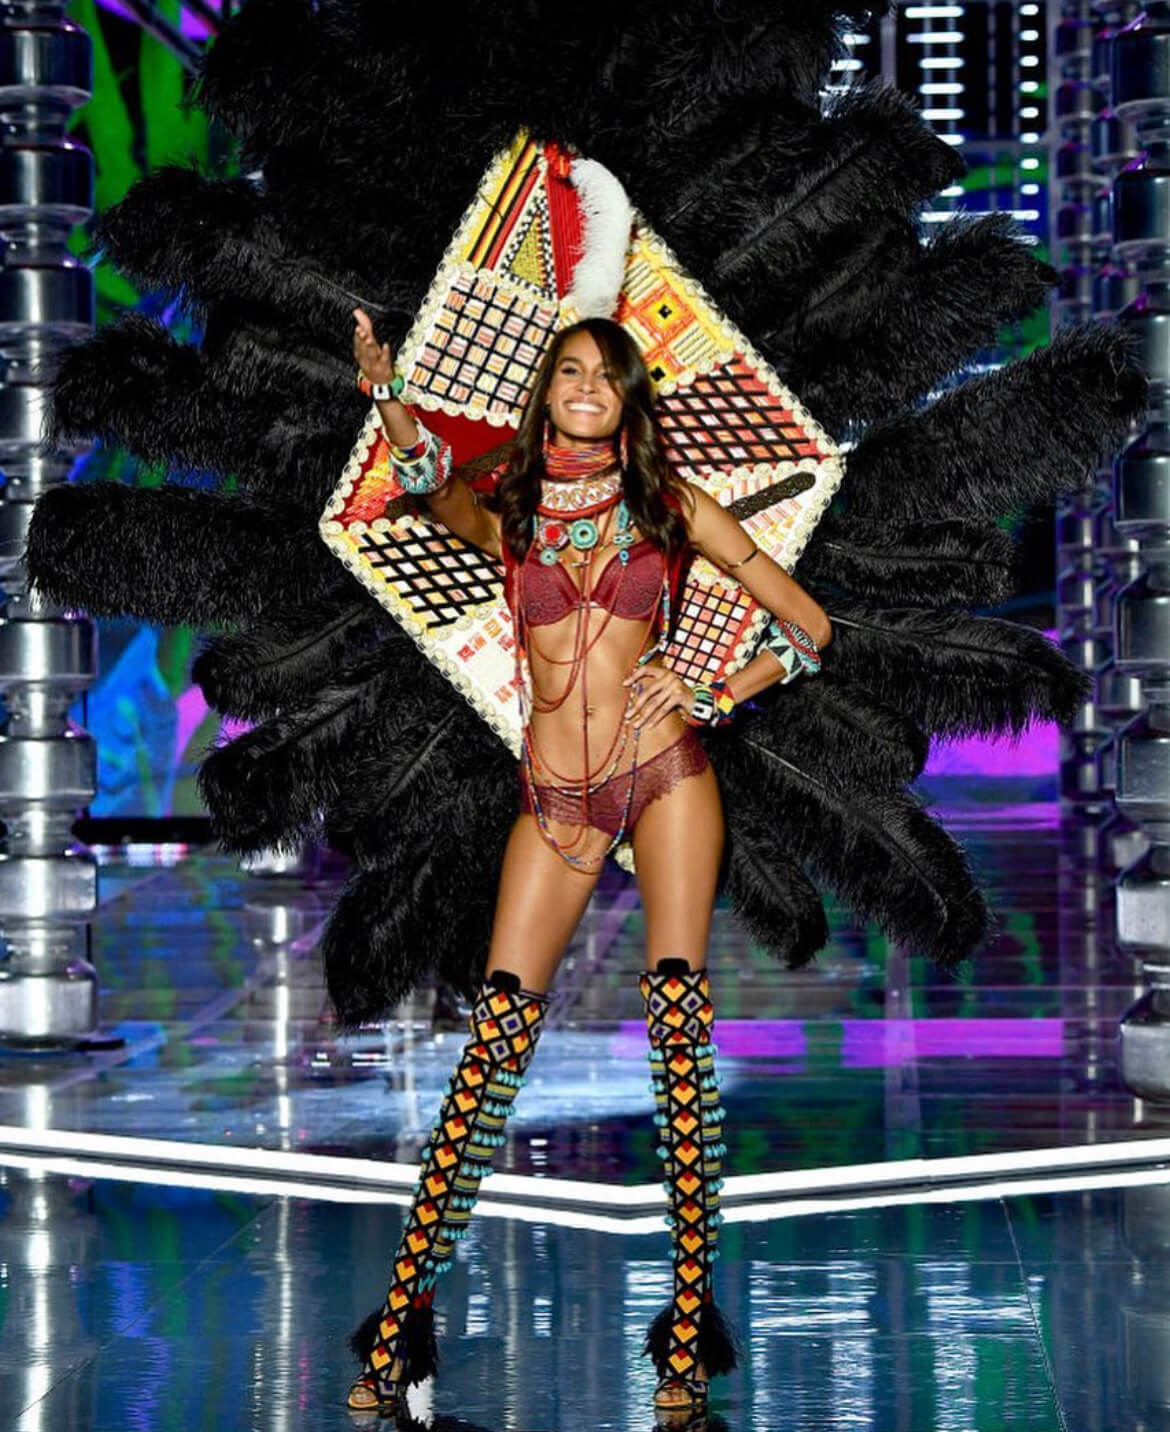 A photo of Victoria's Secret Angel Cindy Bruna during the Victoria's Secret x Shanghai edition in 2017.